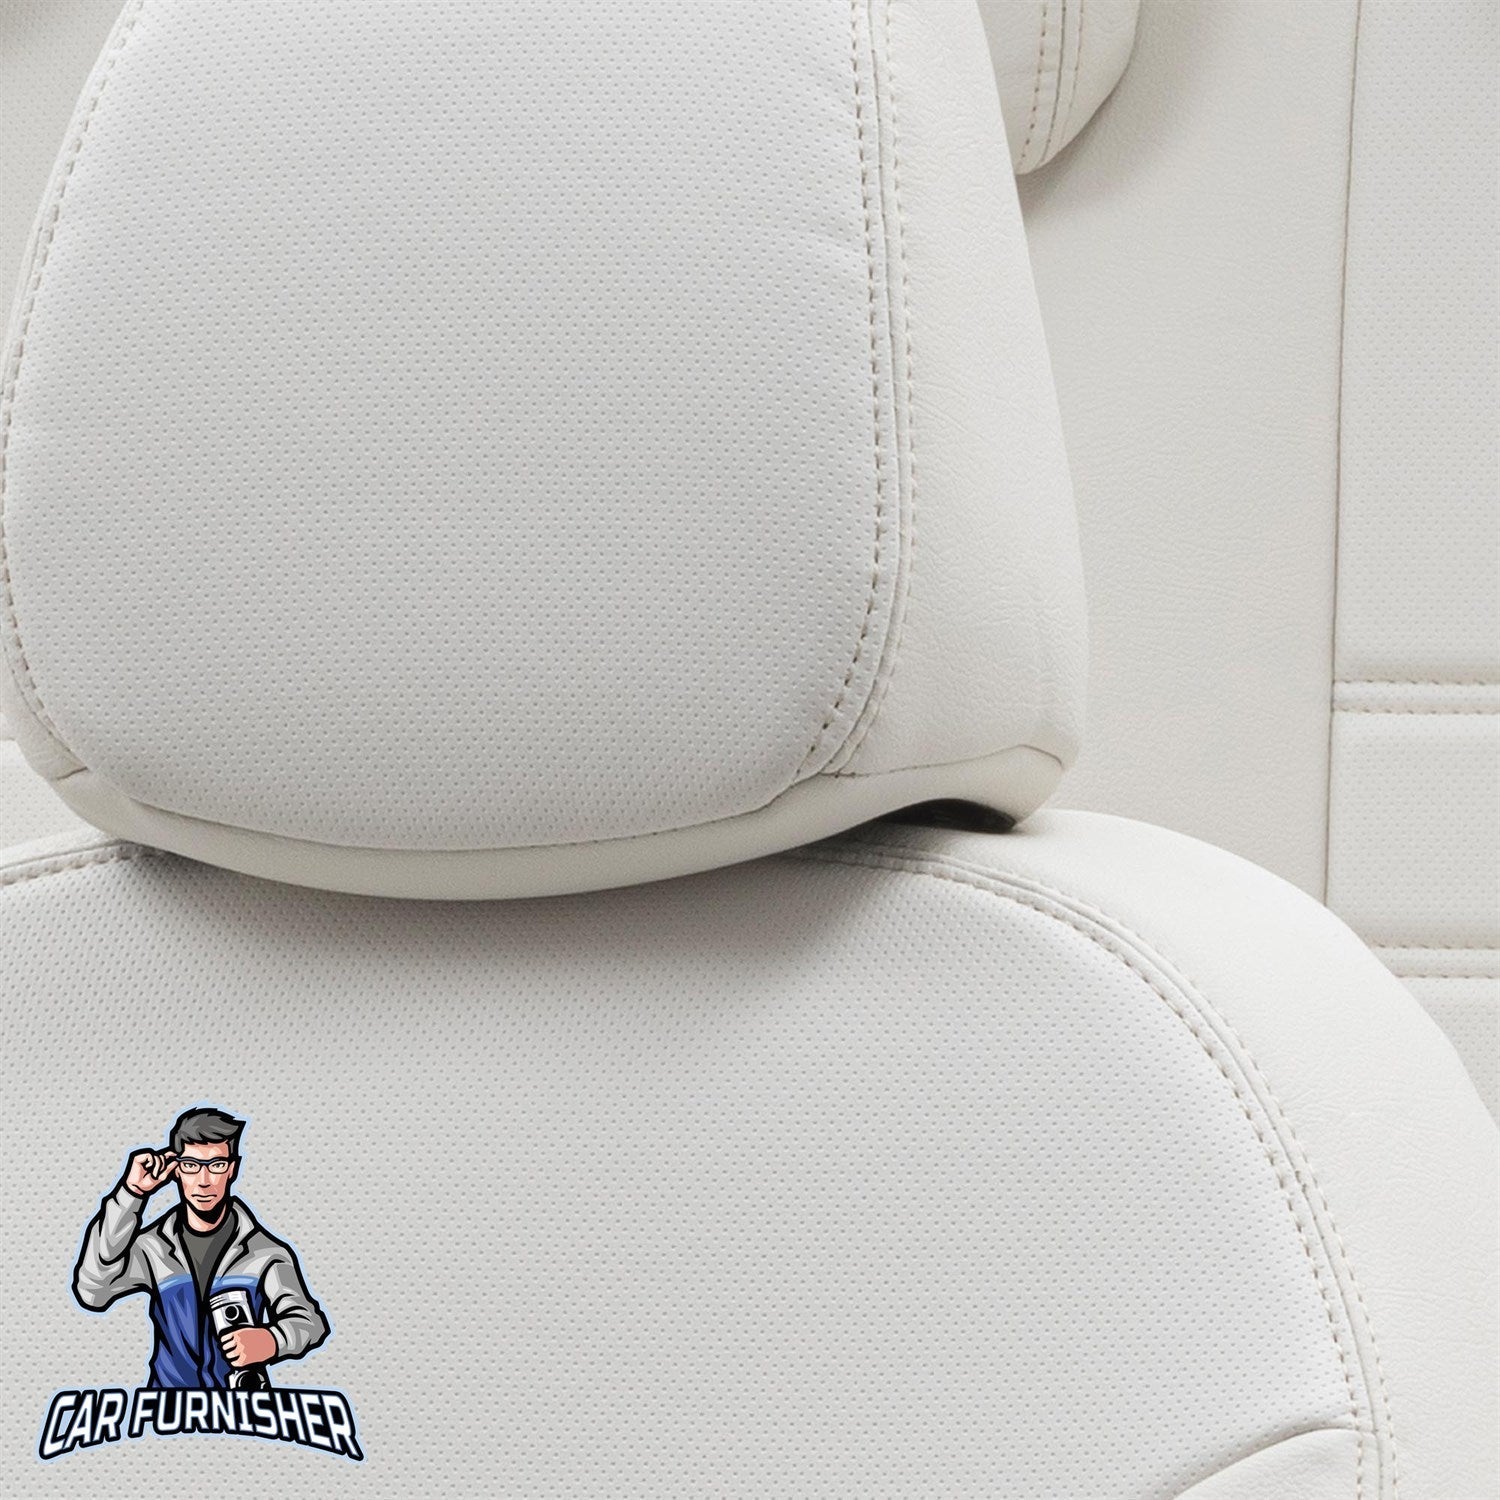 Fiat Tempra Seat Covers Istanbul Leather Design Ivory Leather